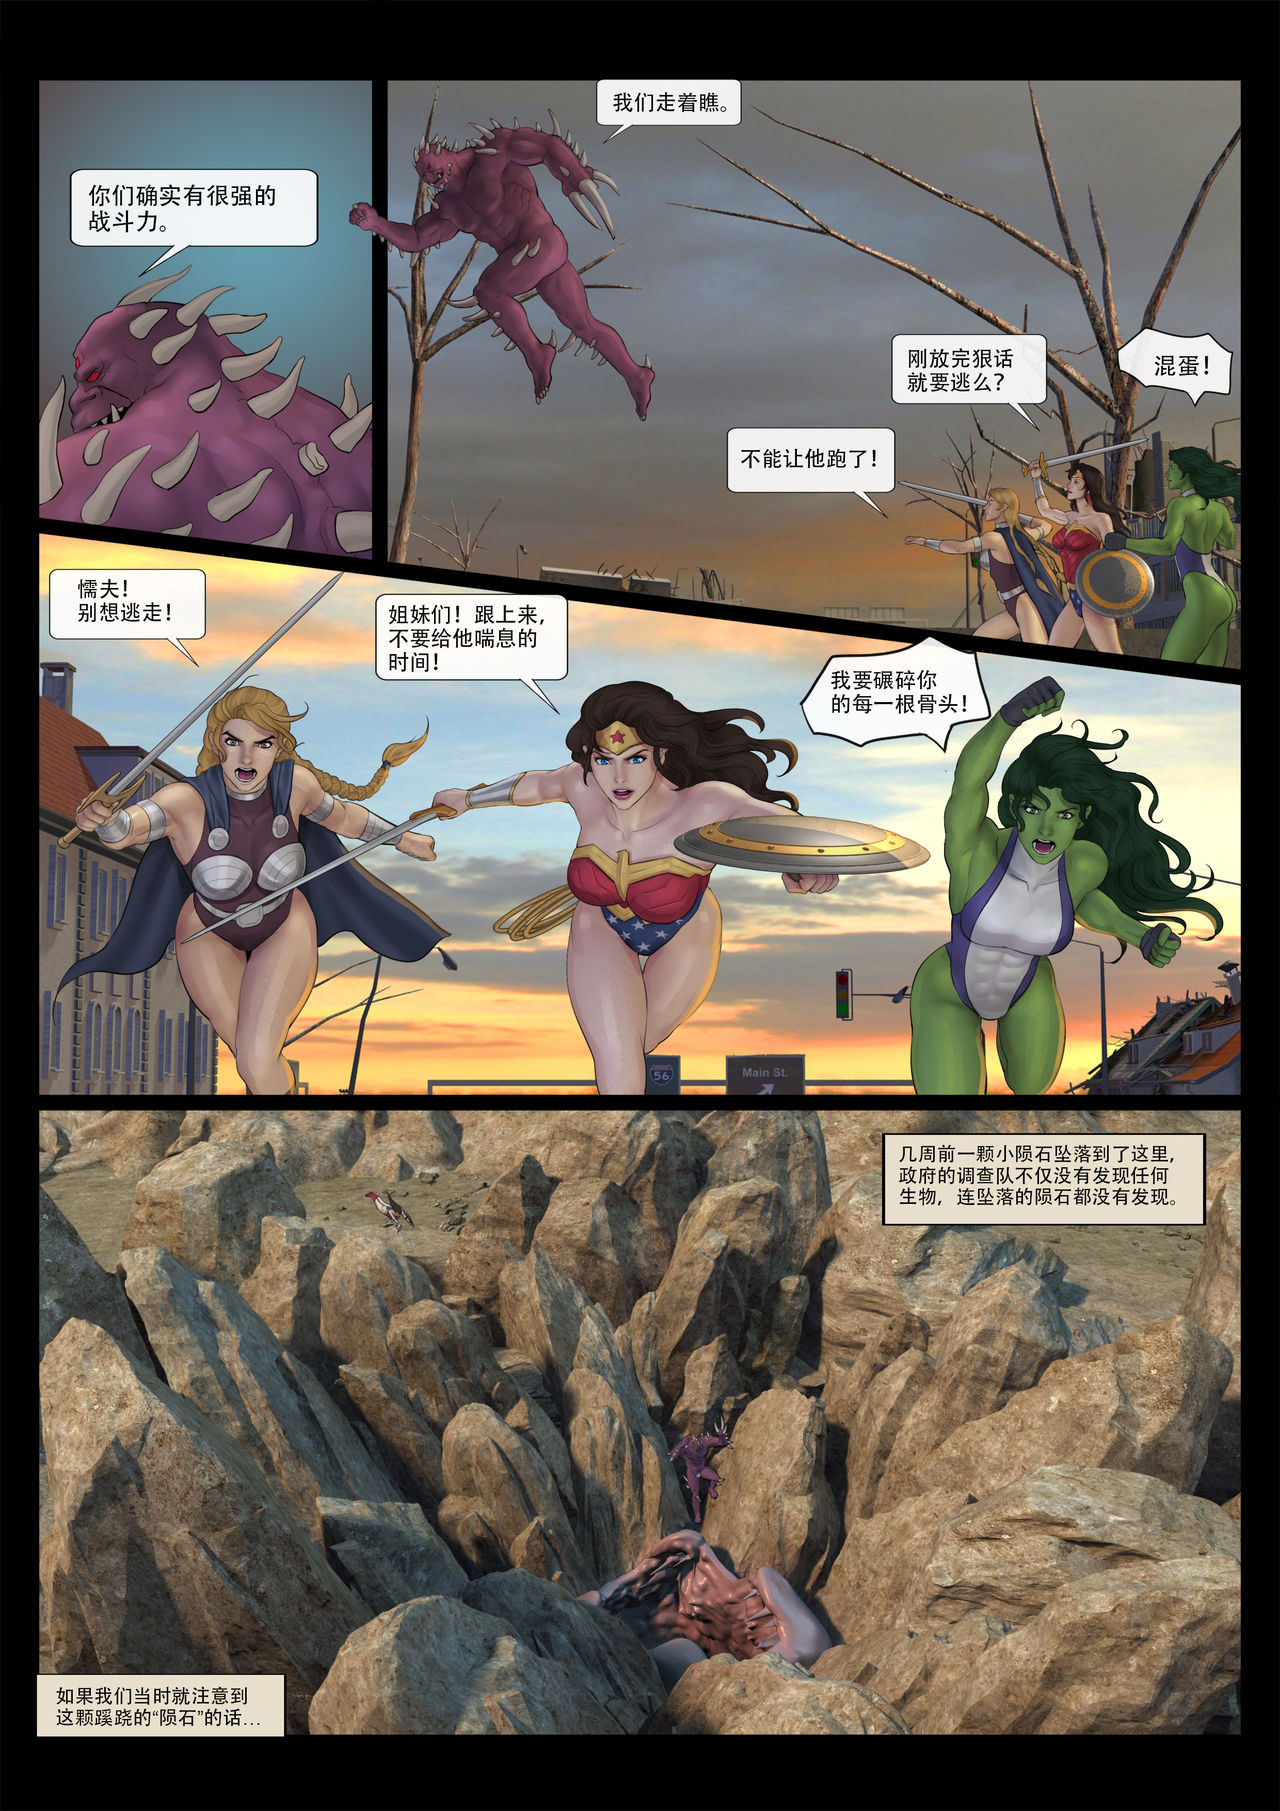 [Feather] - Avengers nightmare 01- 04 page 6 full